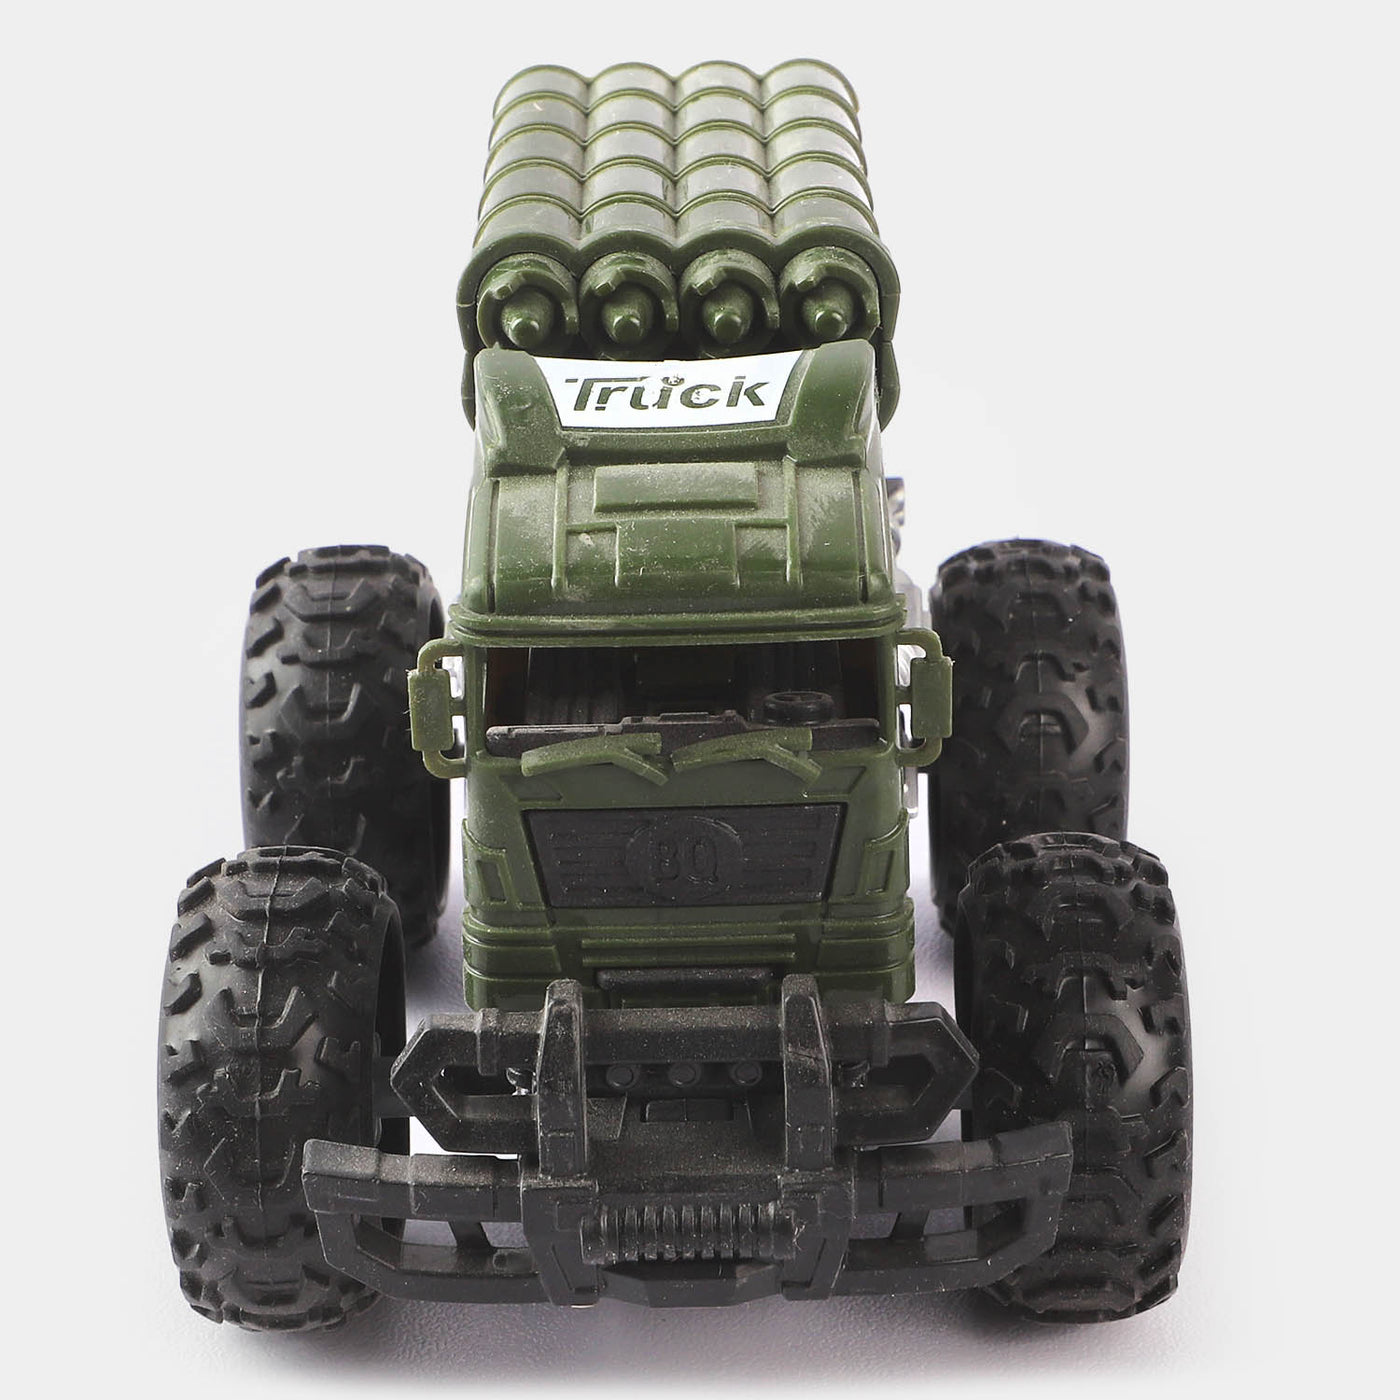 Friction Mini Military Vehicle Toy For Kids